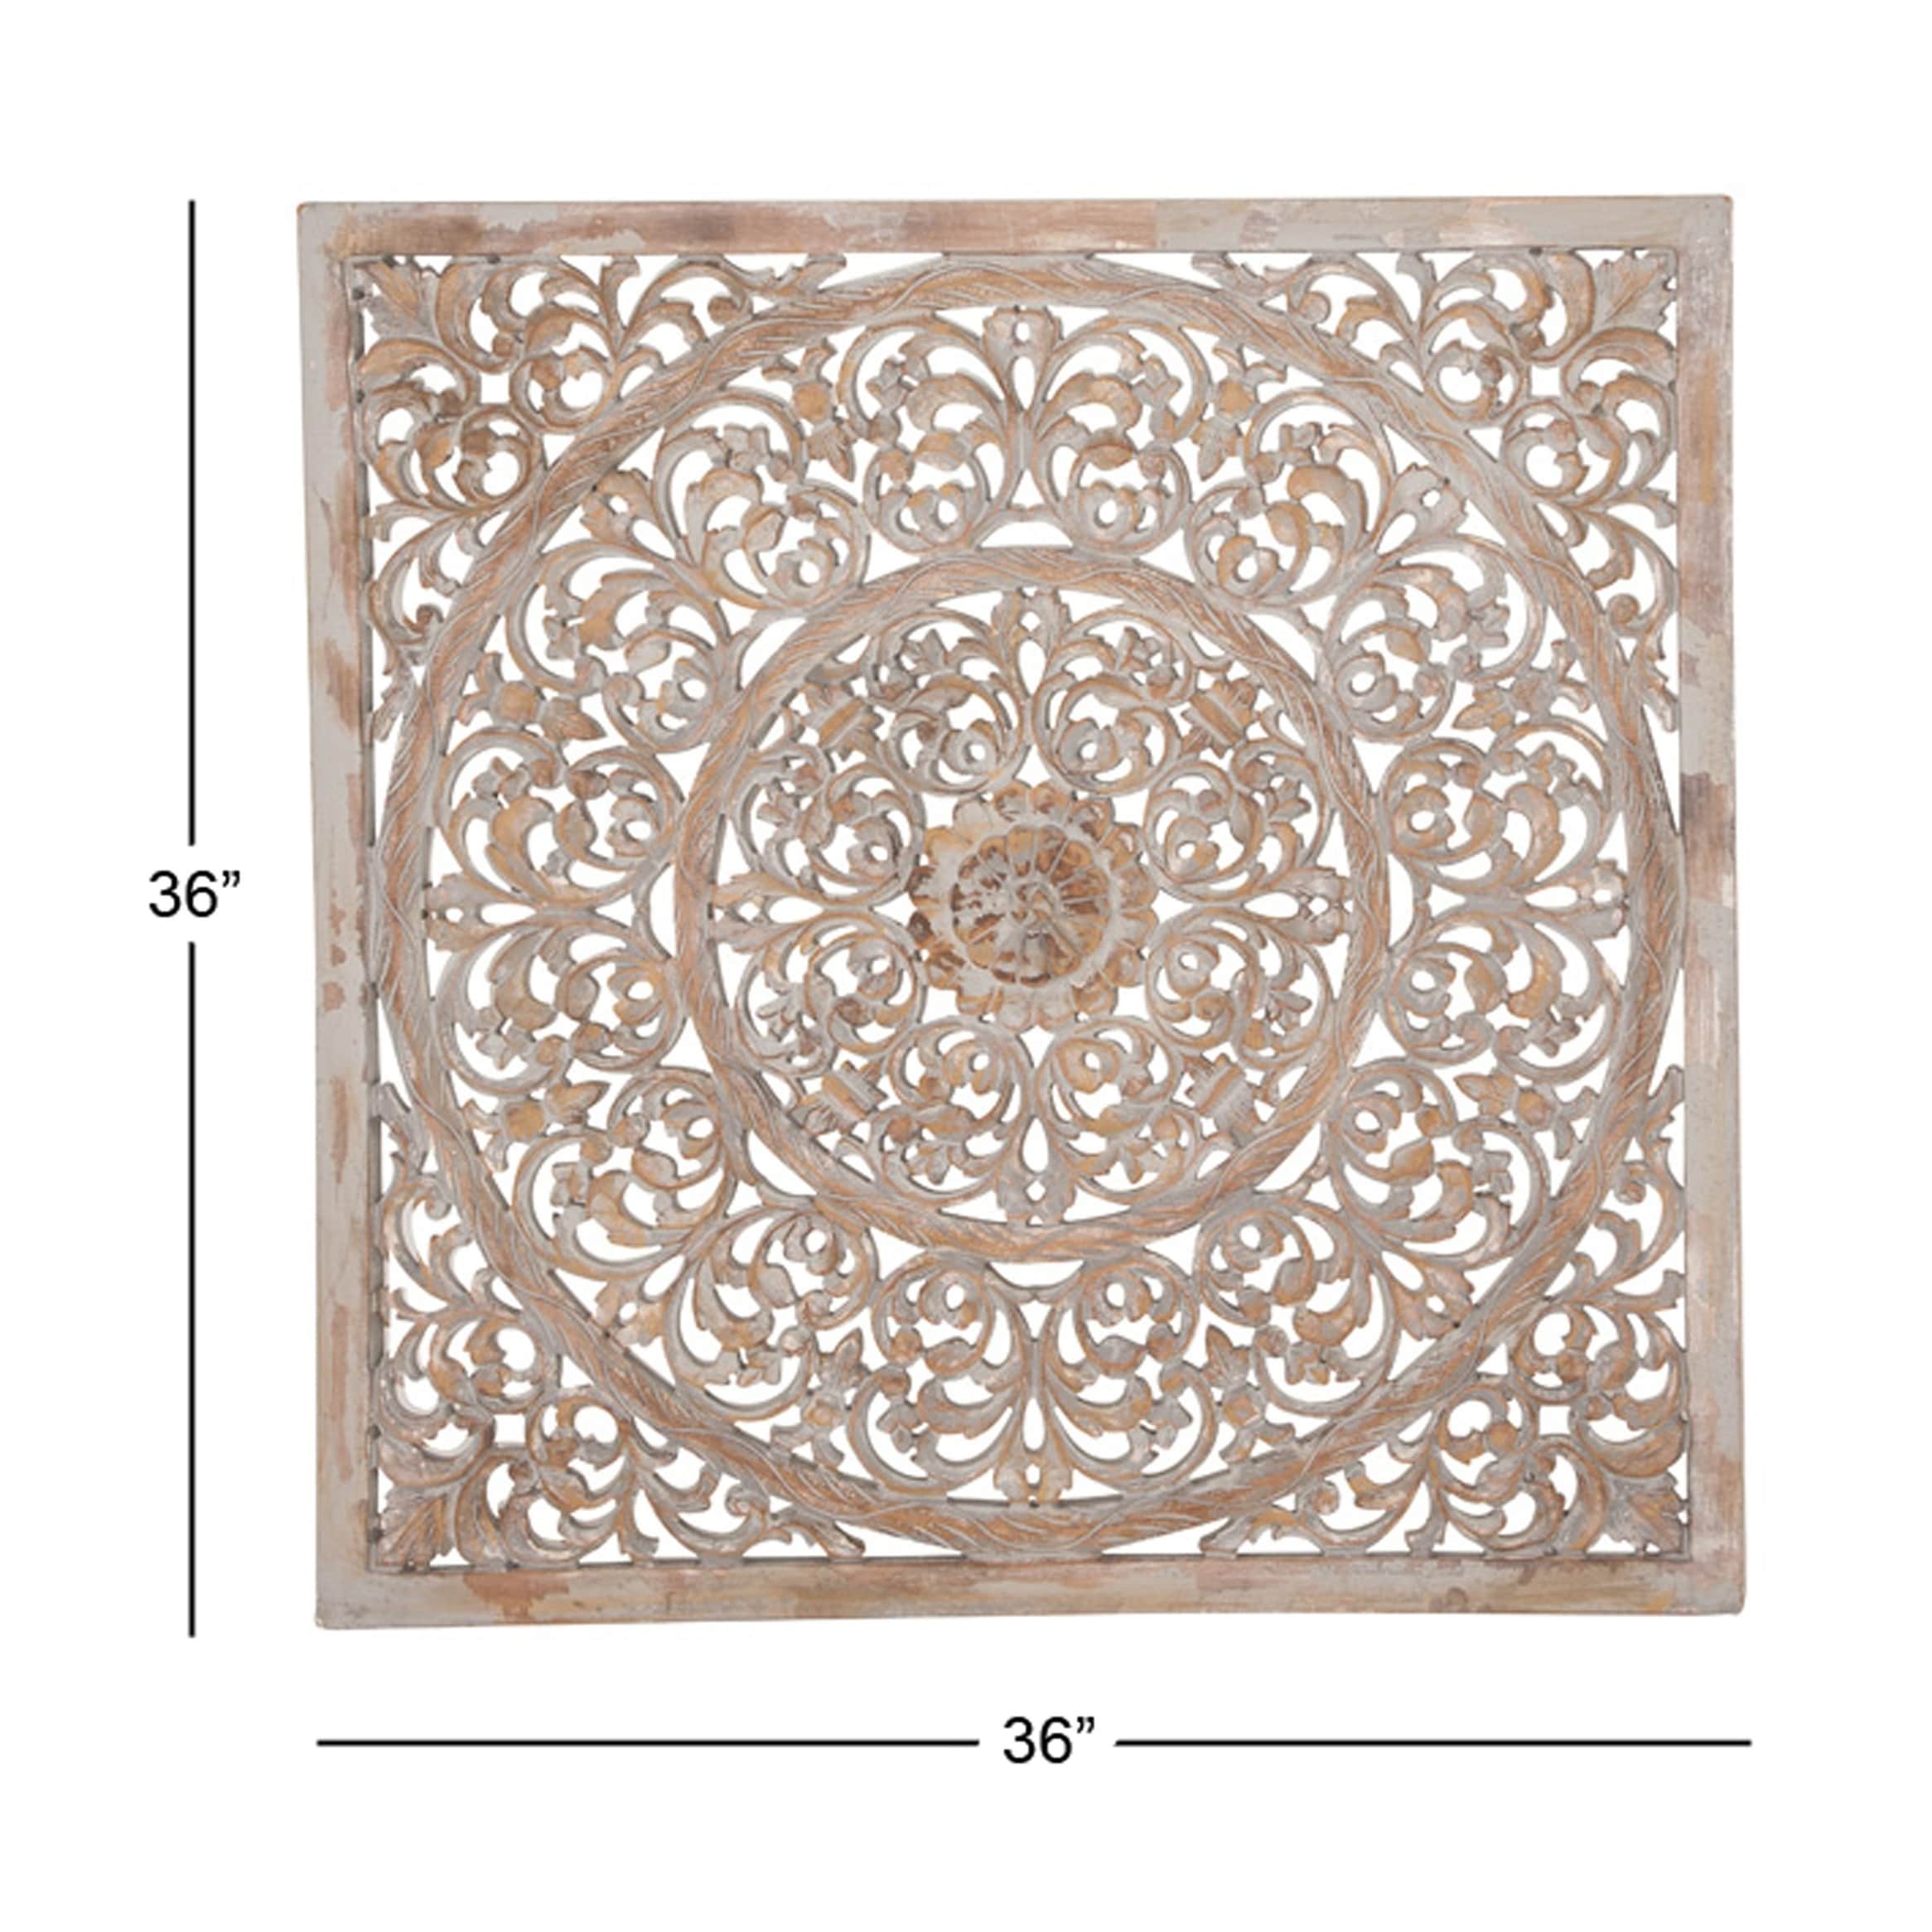 Shop Rustic 36 X 36 Inch Square Brown Wood Ornate Wall Decor On